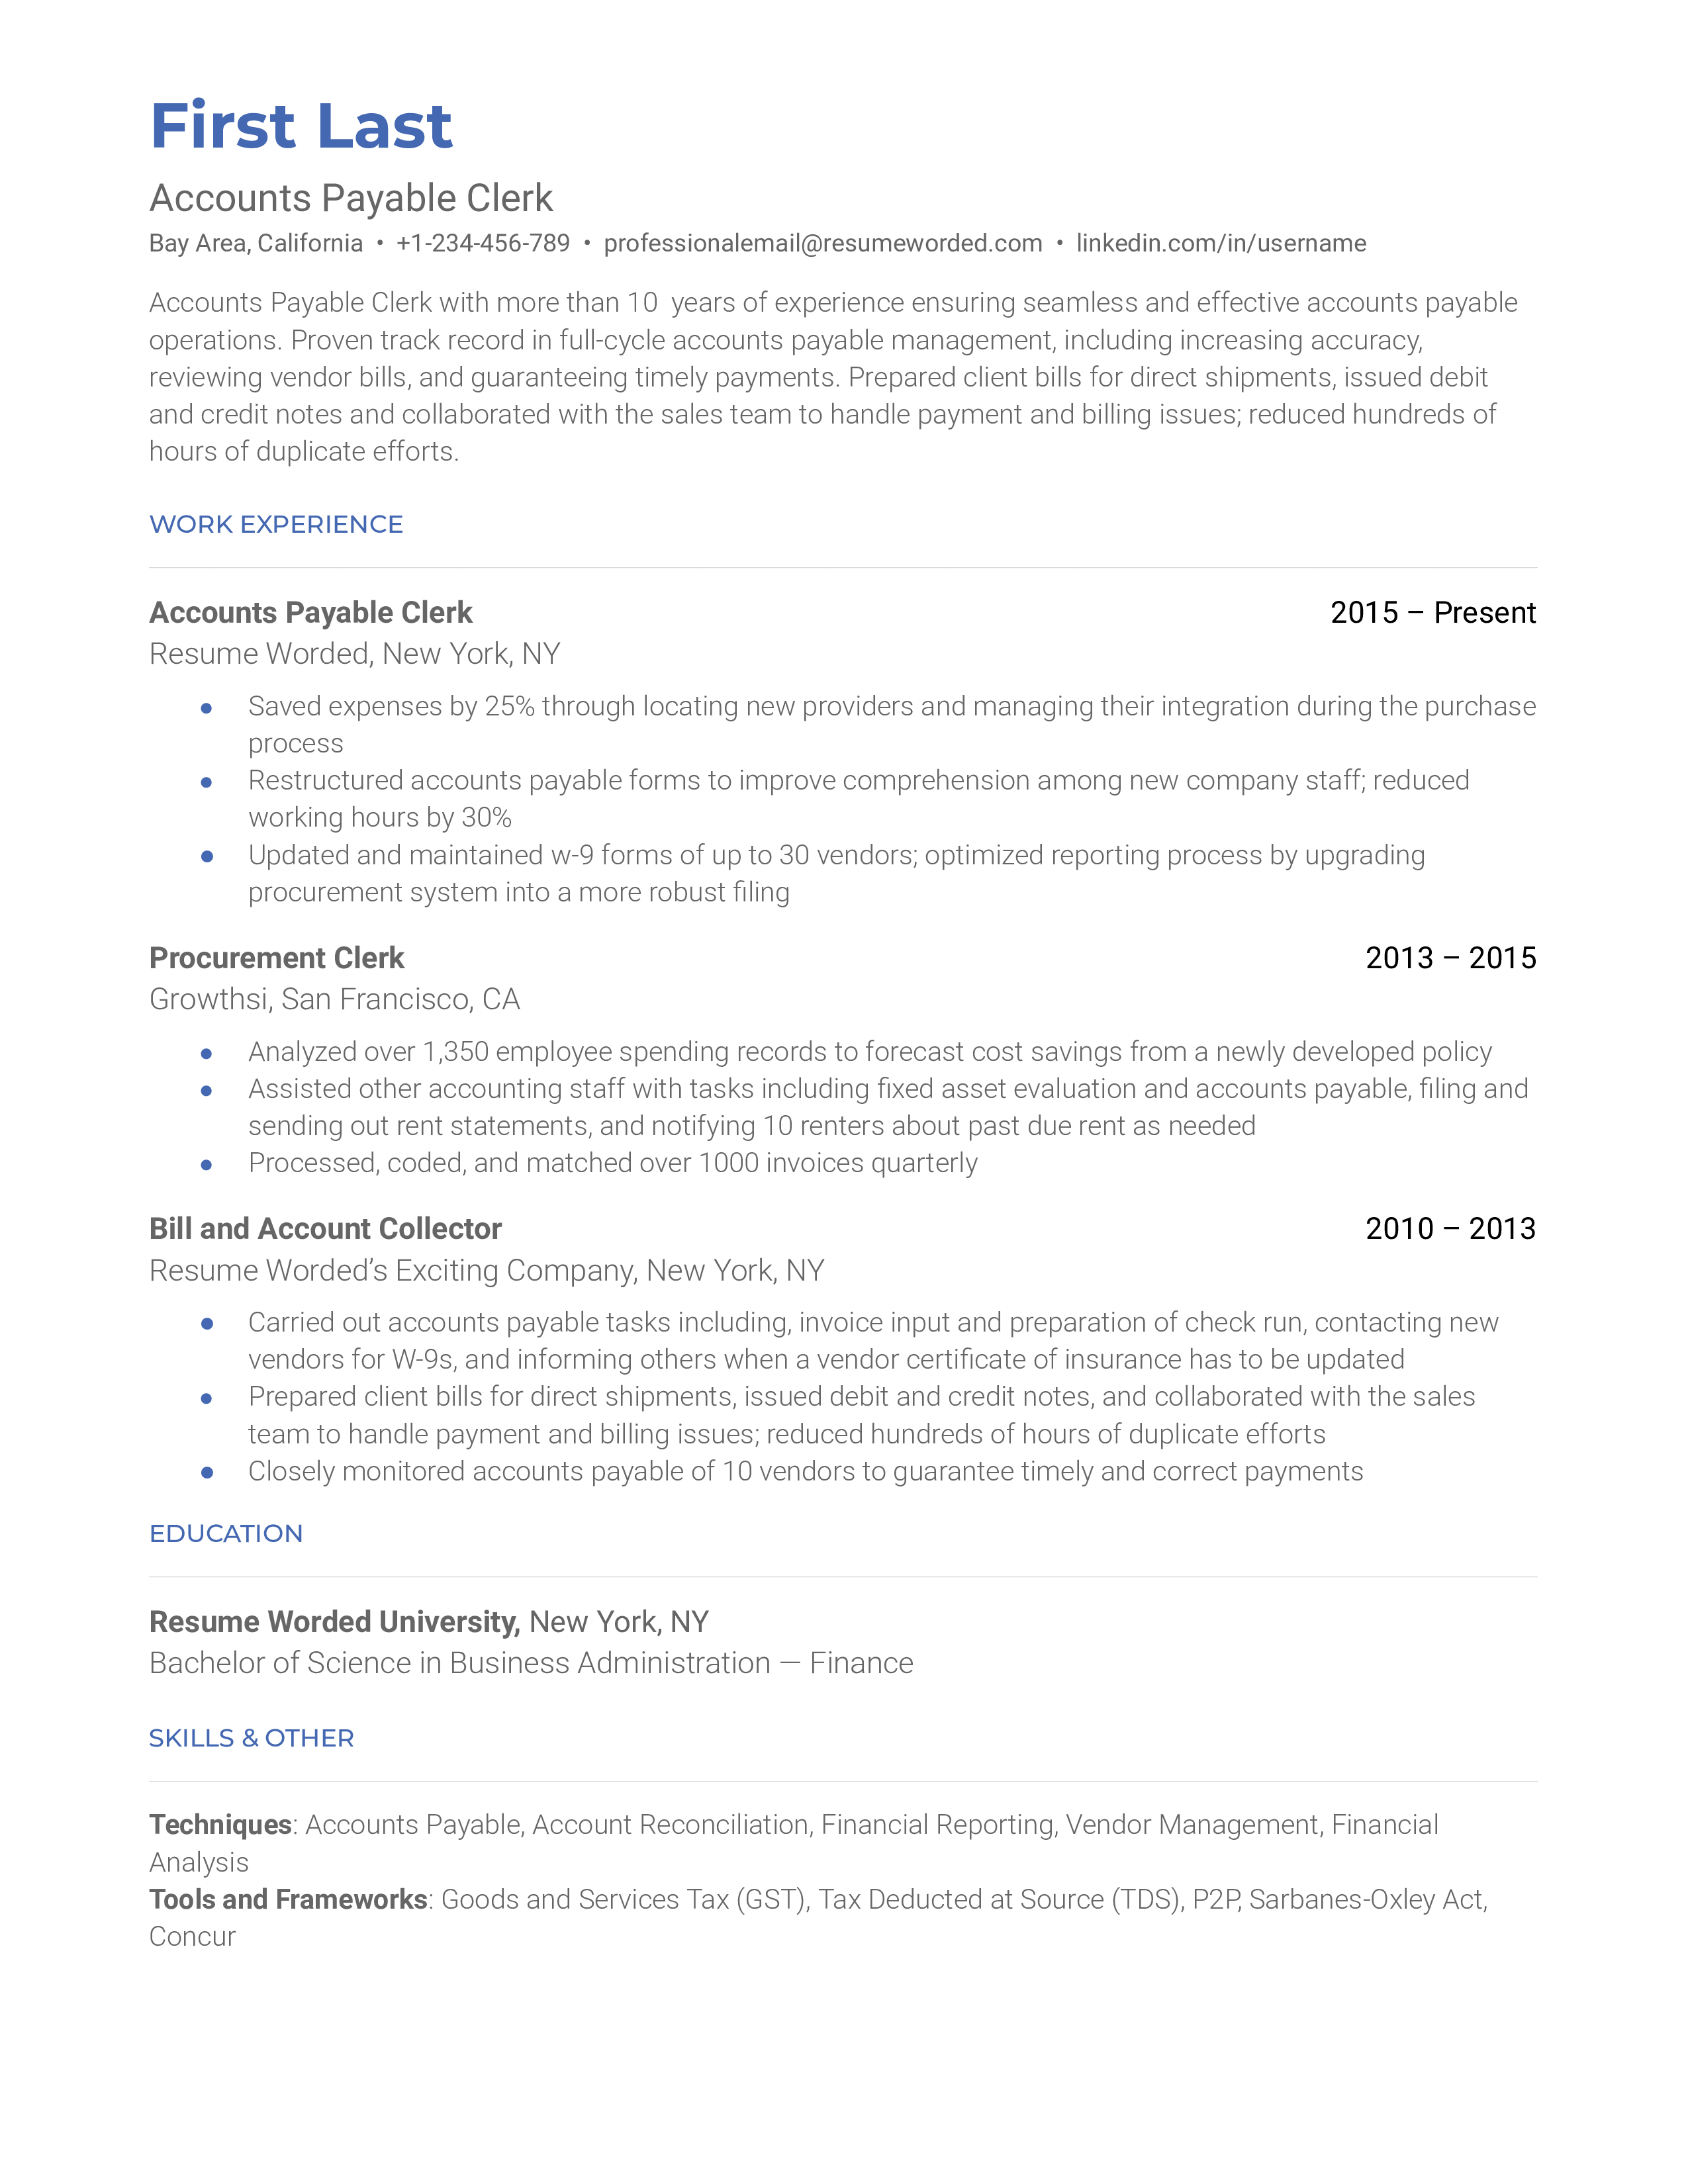 Accounts Payable Clerk Resume Template + Example